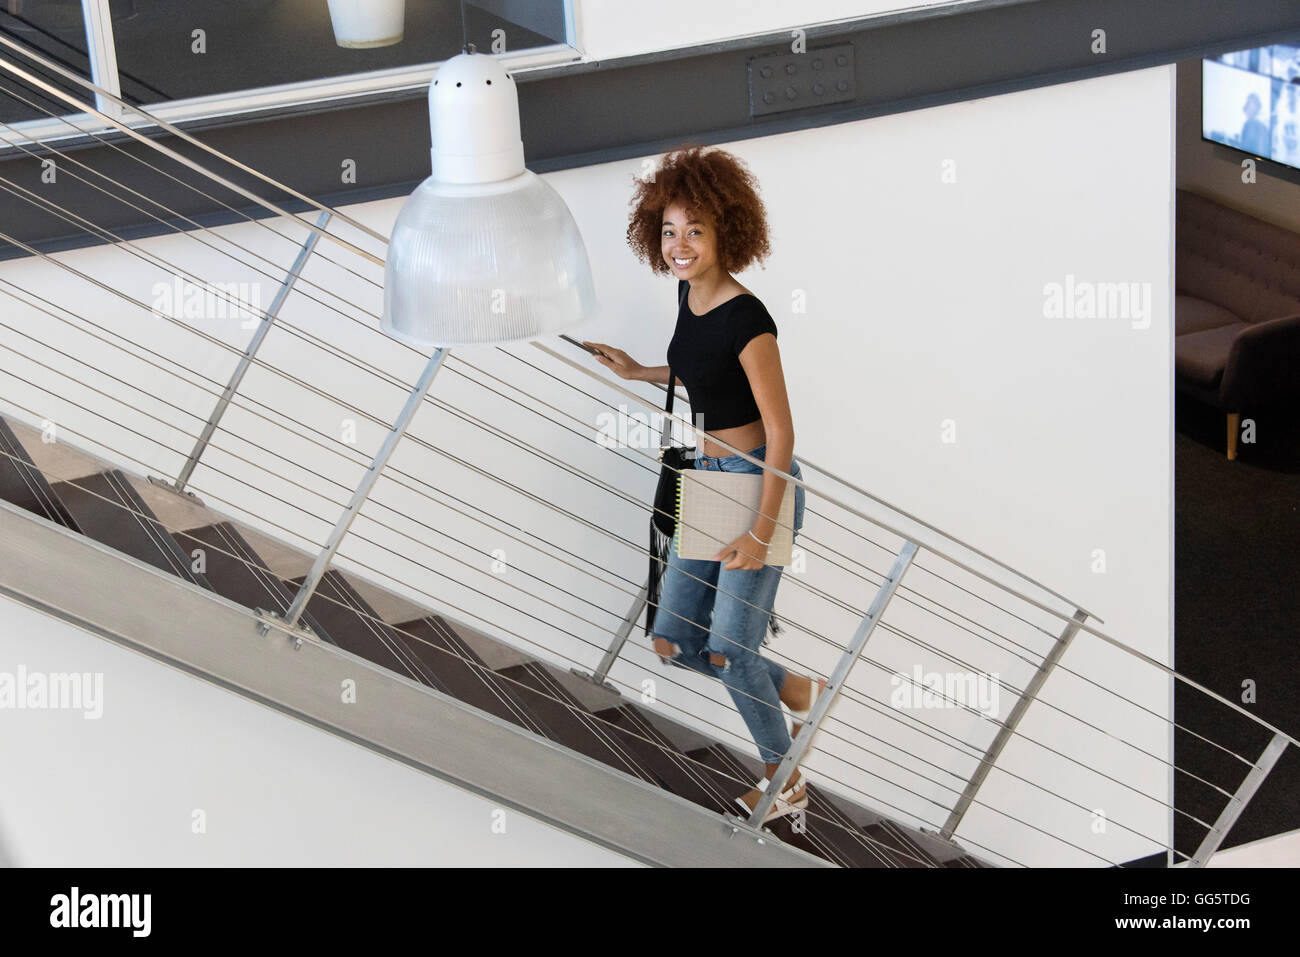 Portrait of a young woman moving up staircase Stock Photo